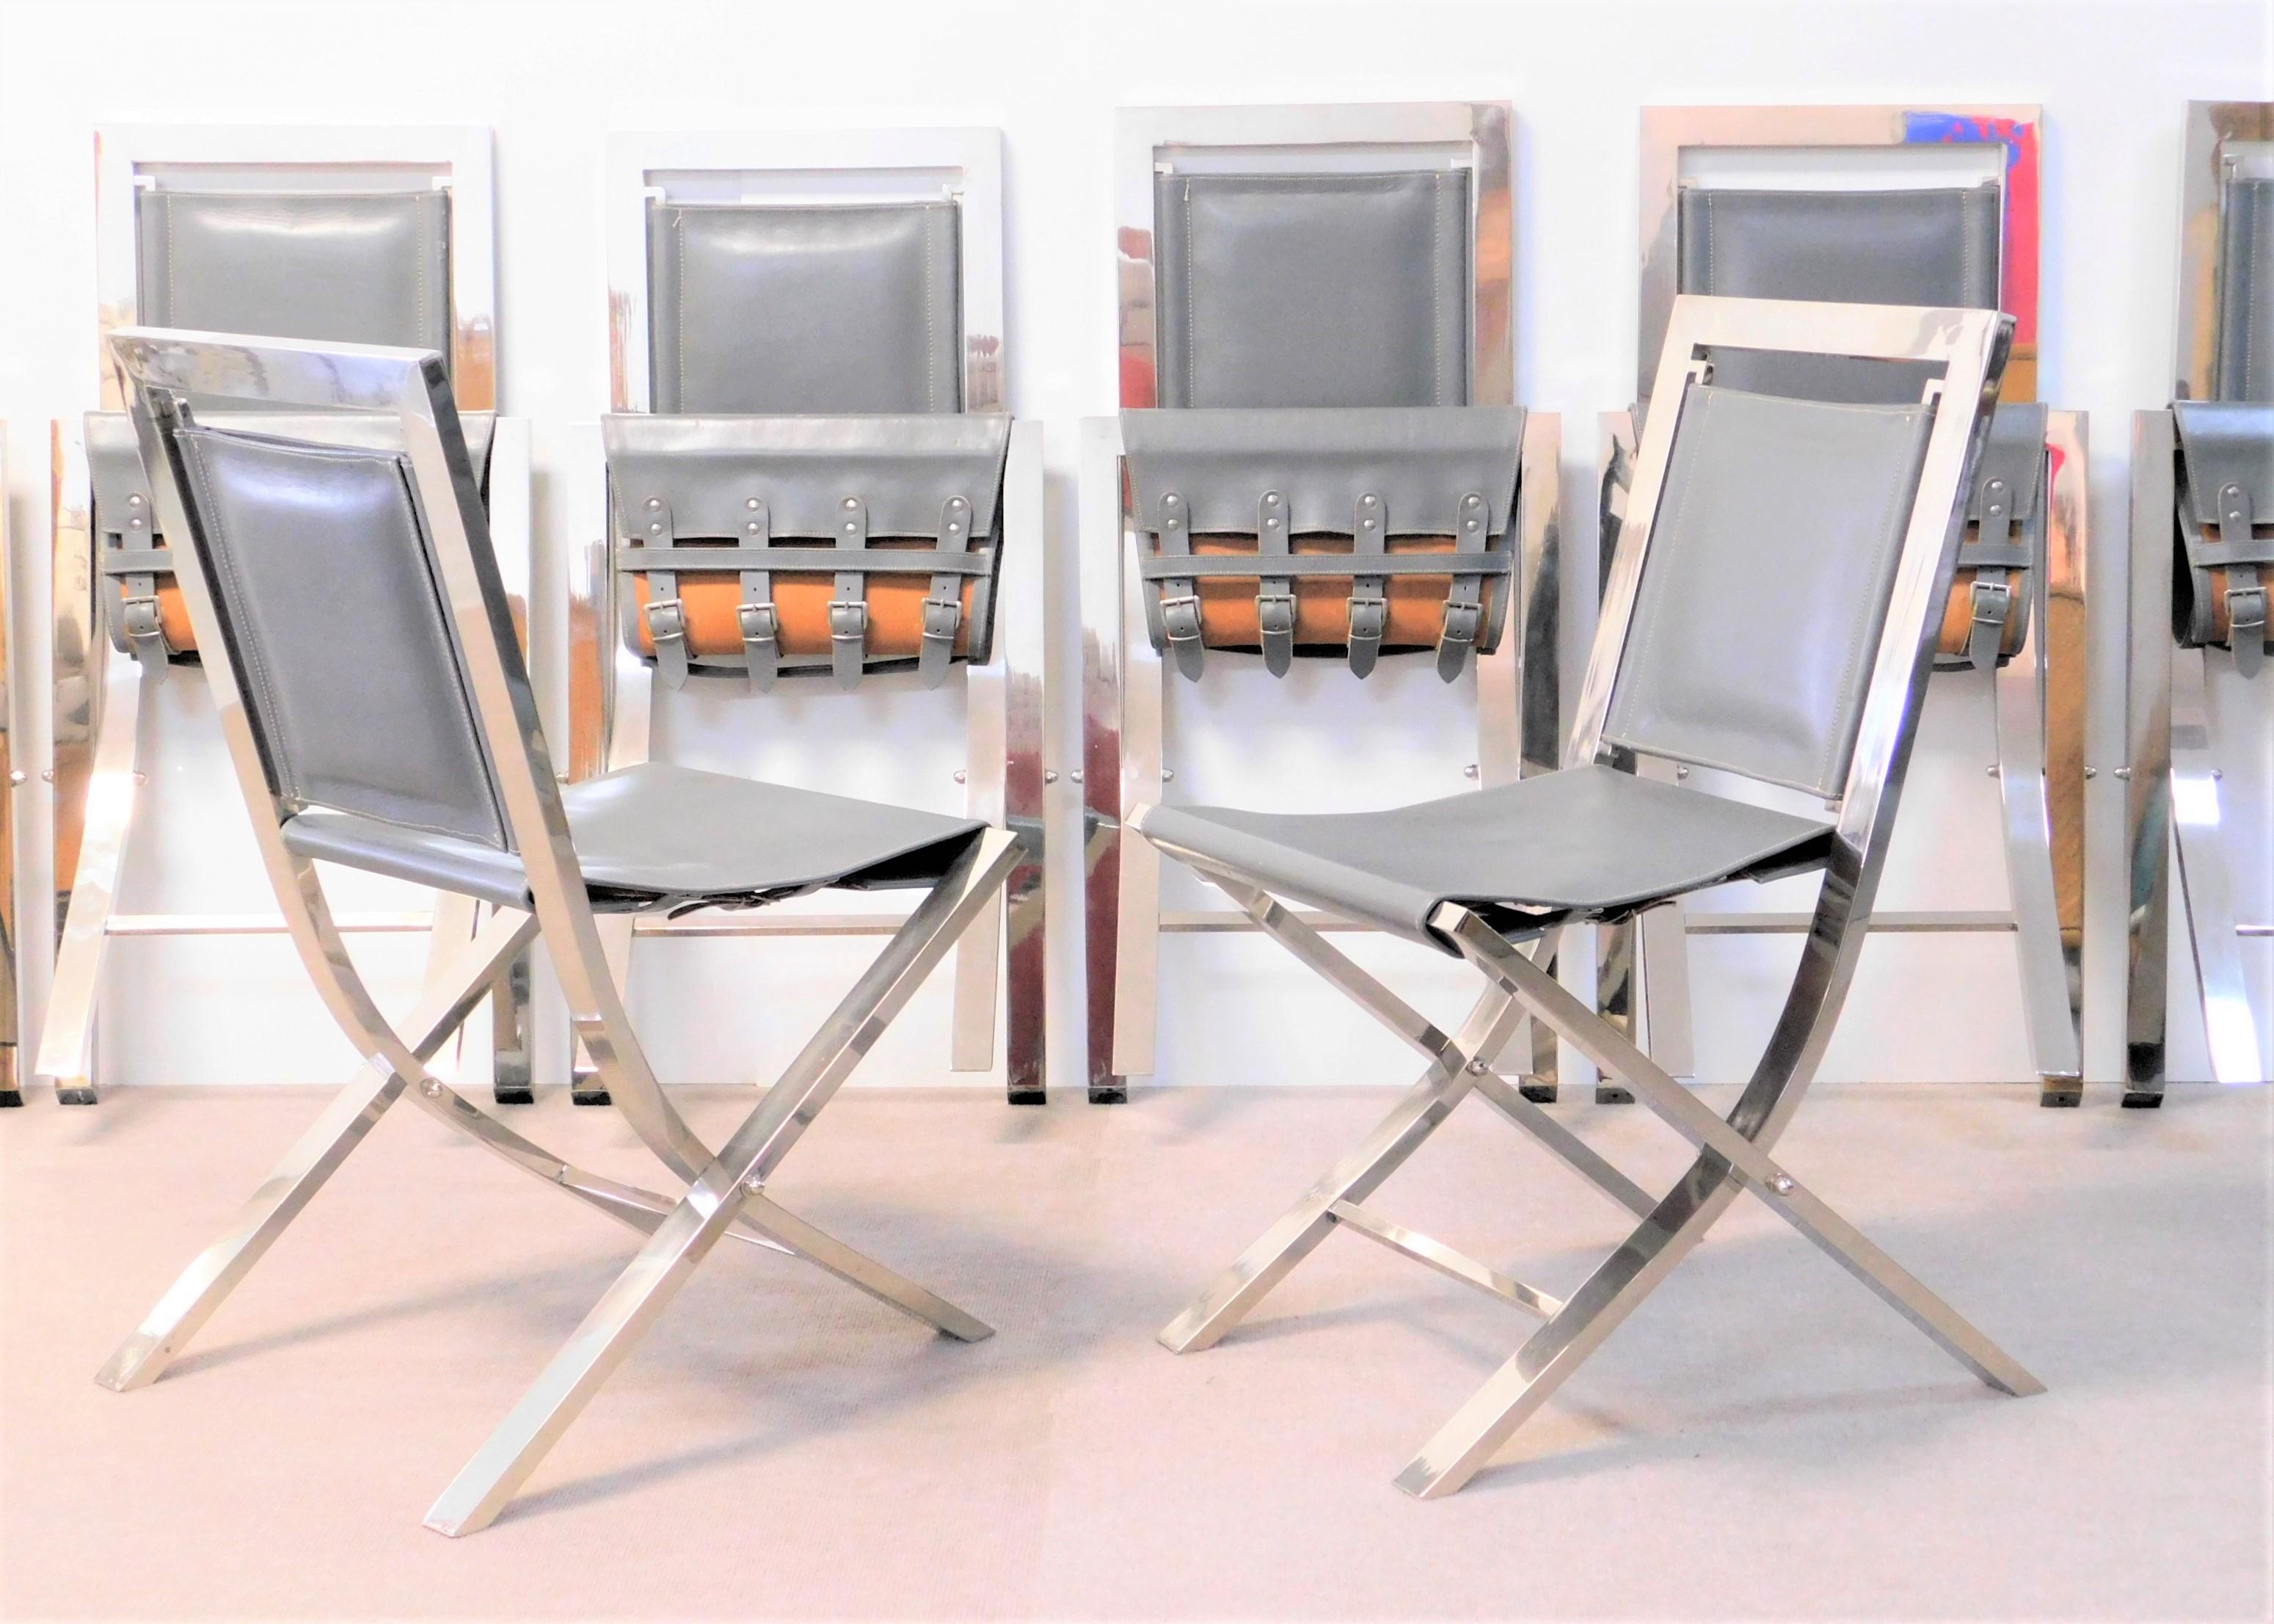 A set of 8 chairs by Gabriella Crespi. The design is quite striking in its perfect simplicity, clean modern lines with the polished metal contrasting with the organic beauty of the leather. When folded we realize  that we have been deceived by the